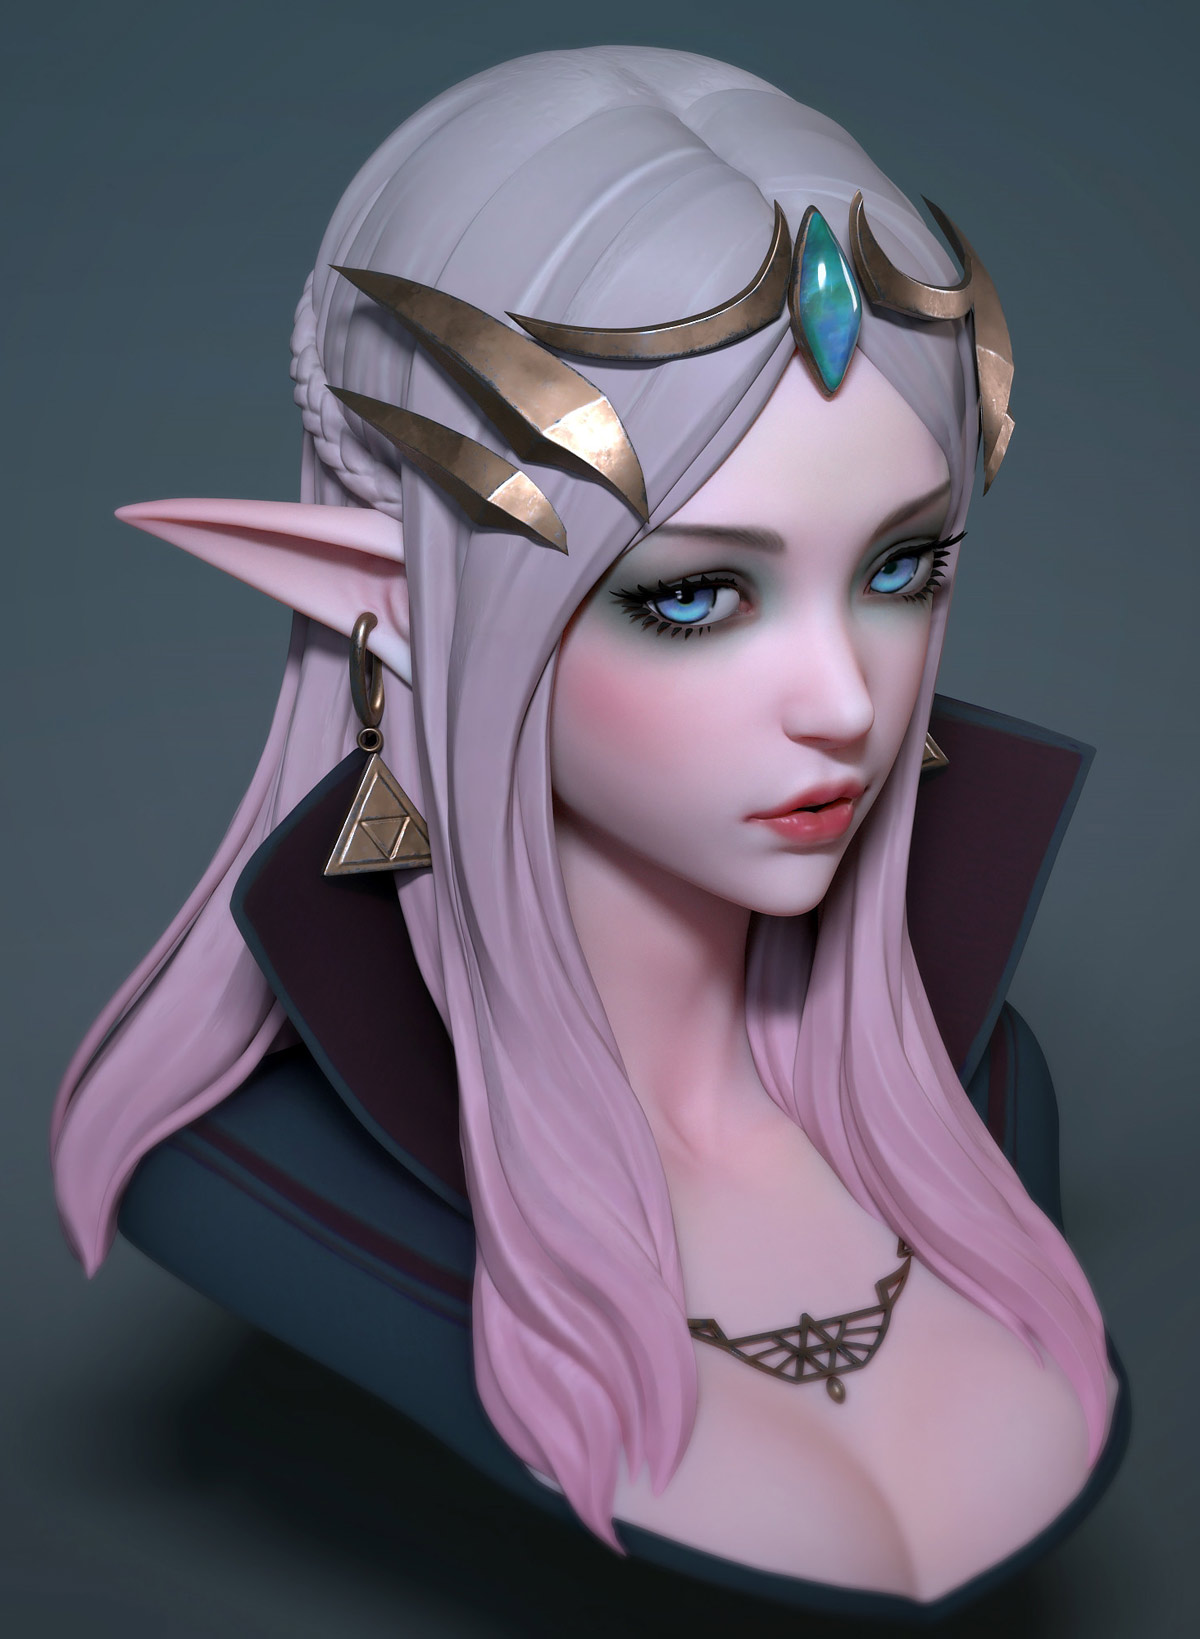 3d model character princess by michael mao